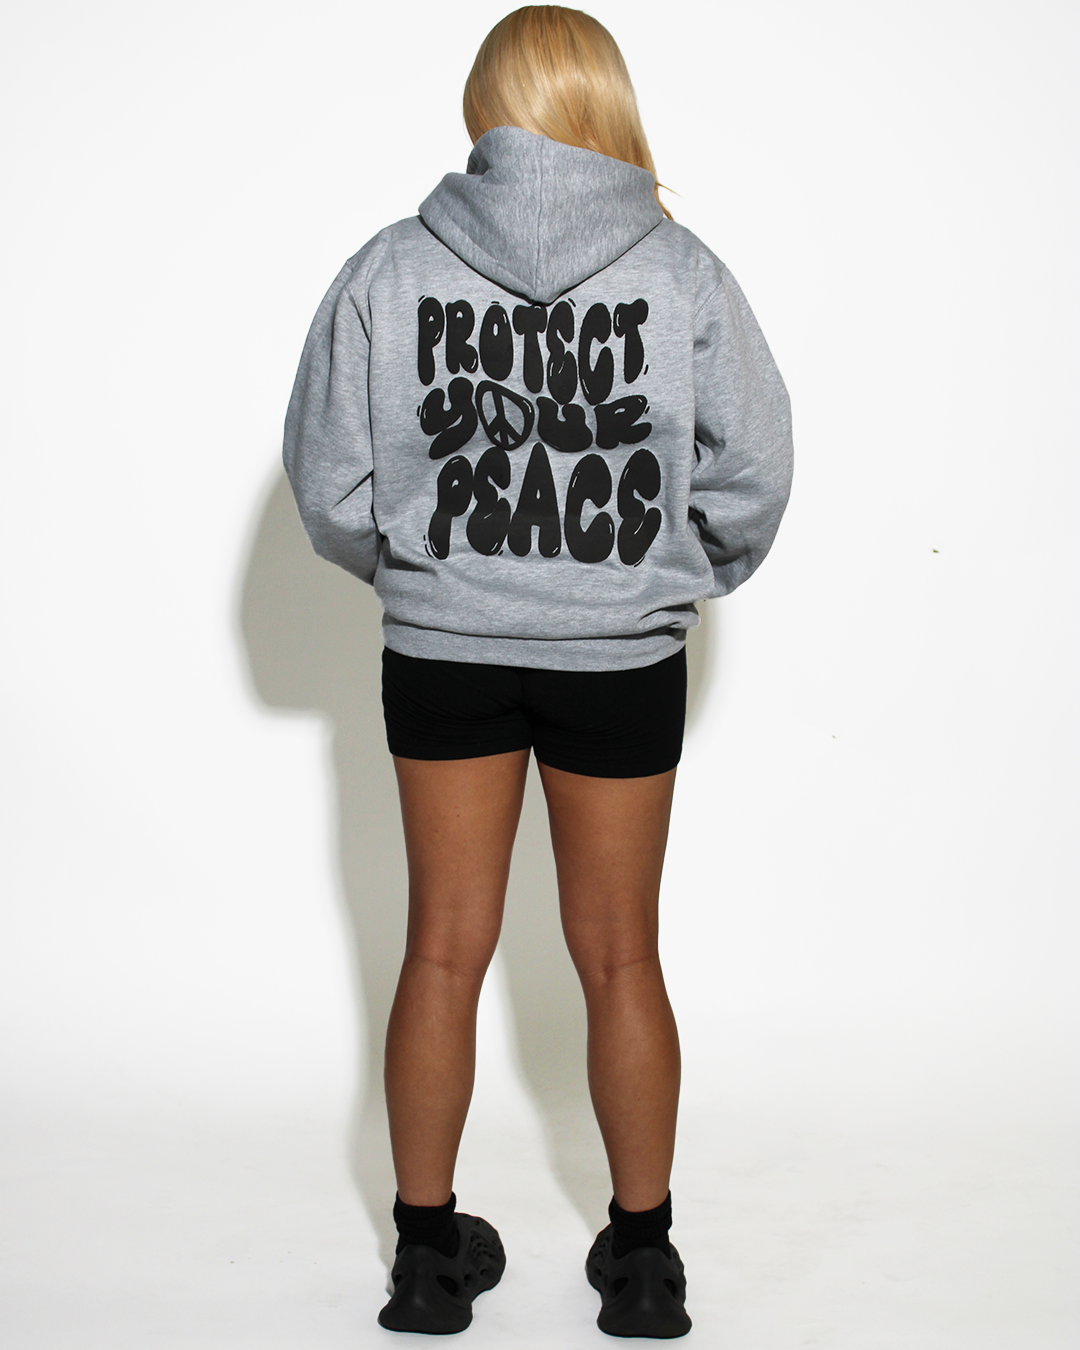 "Protect Your Peace" Hoodie